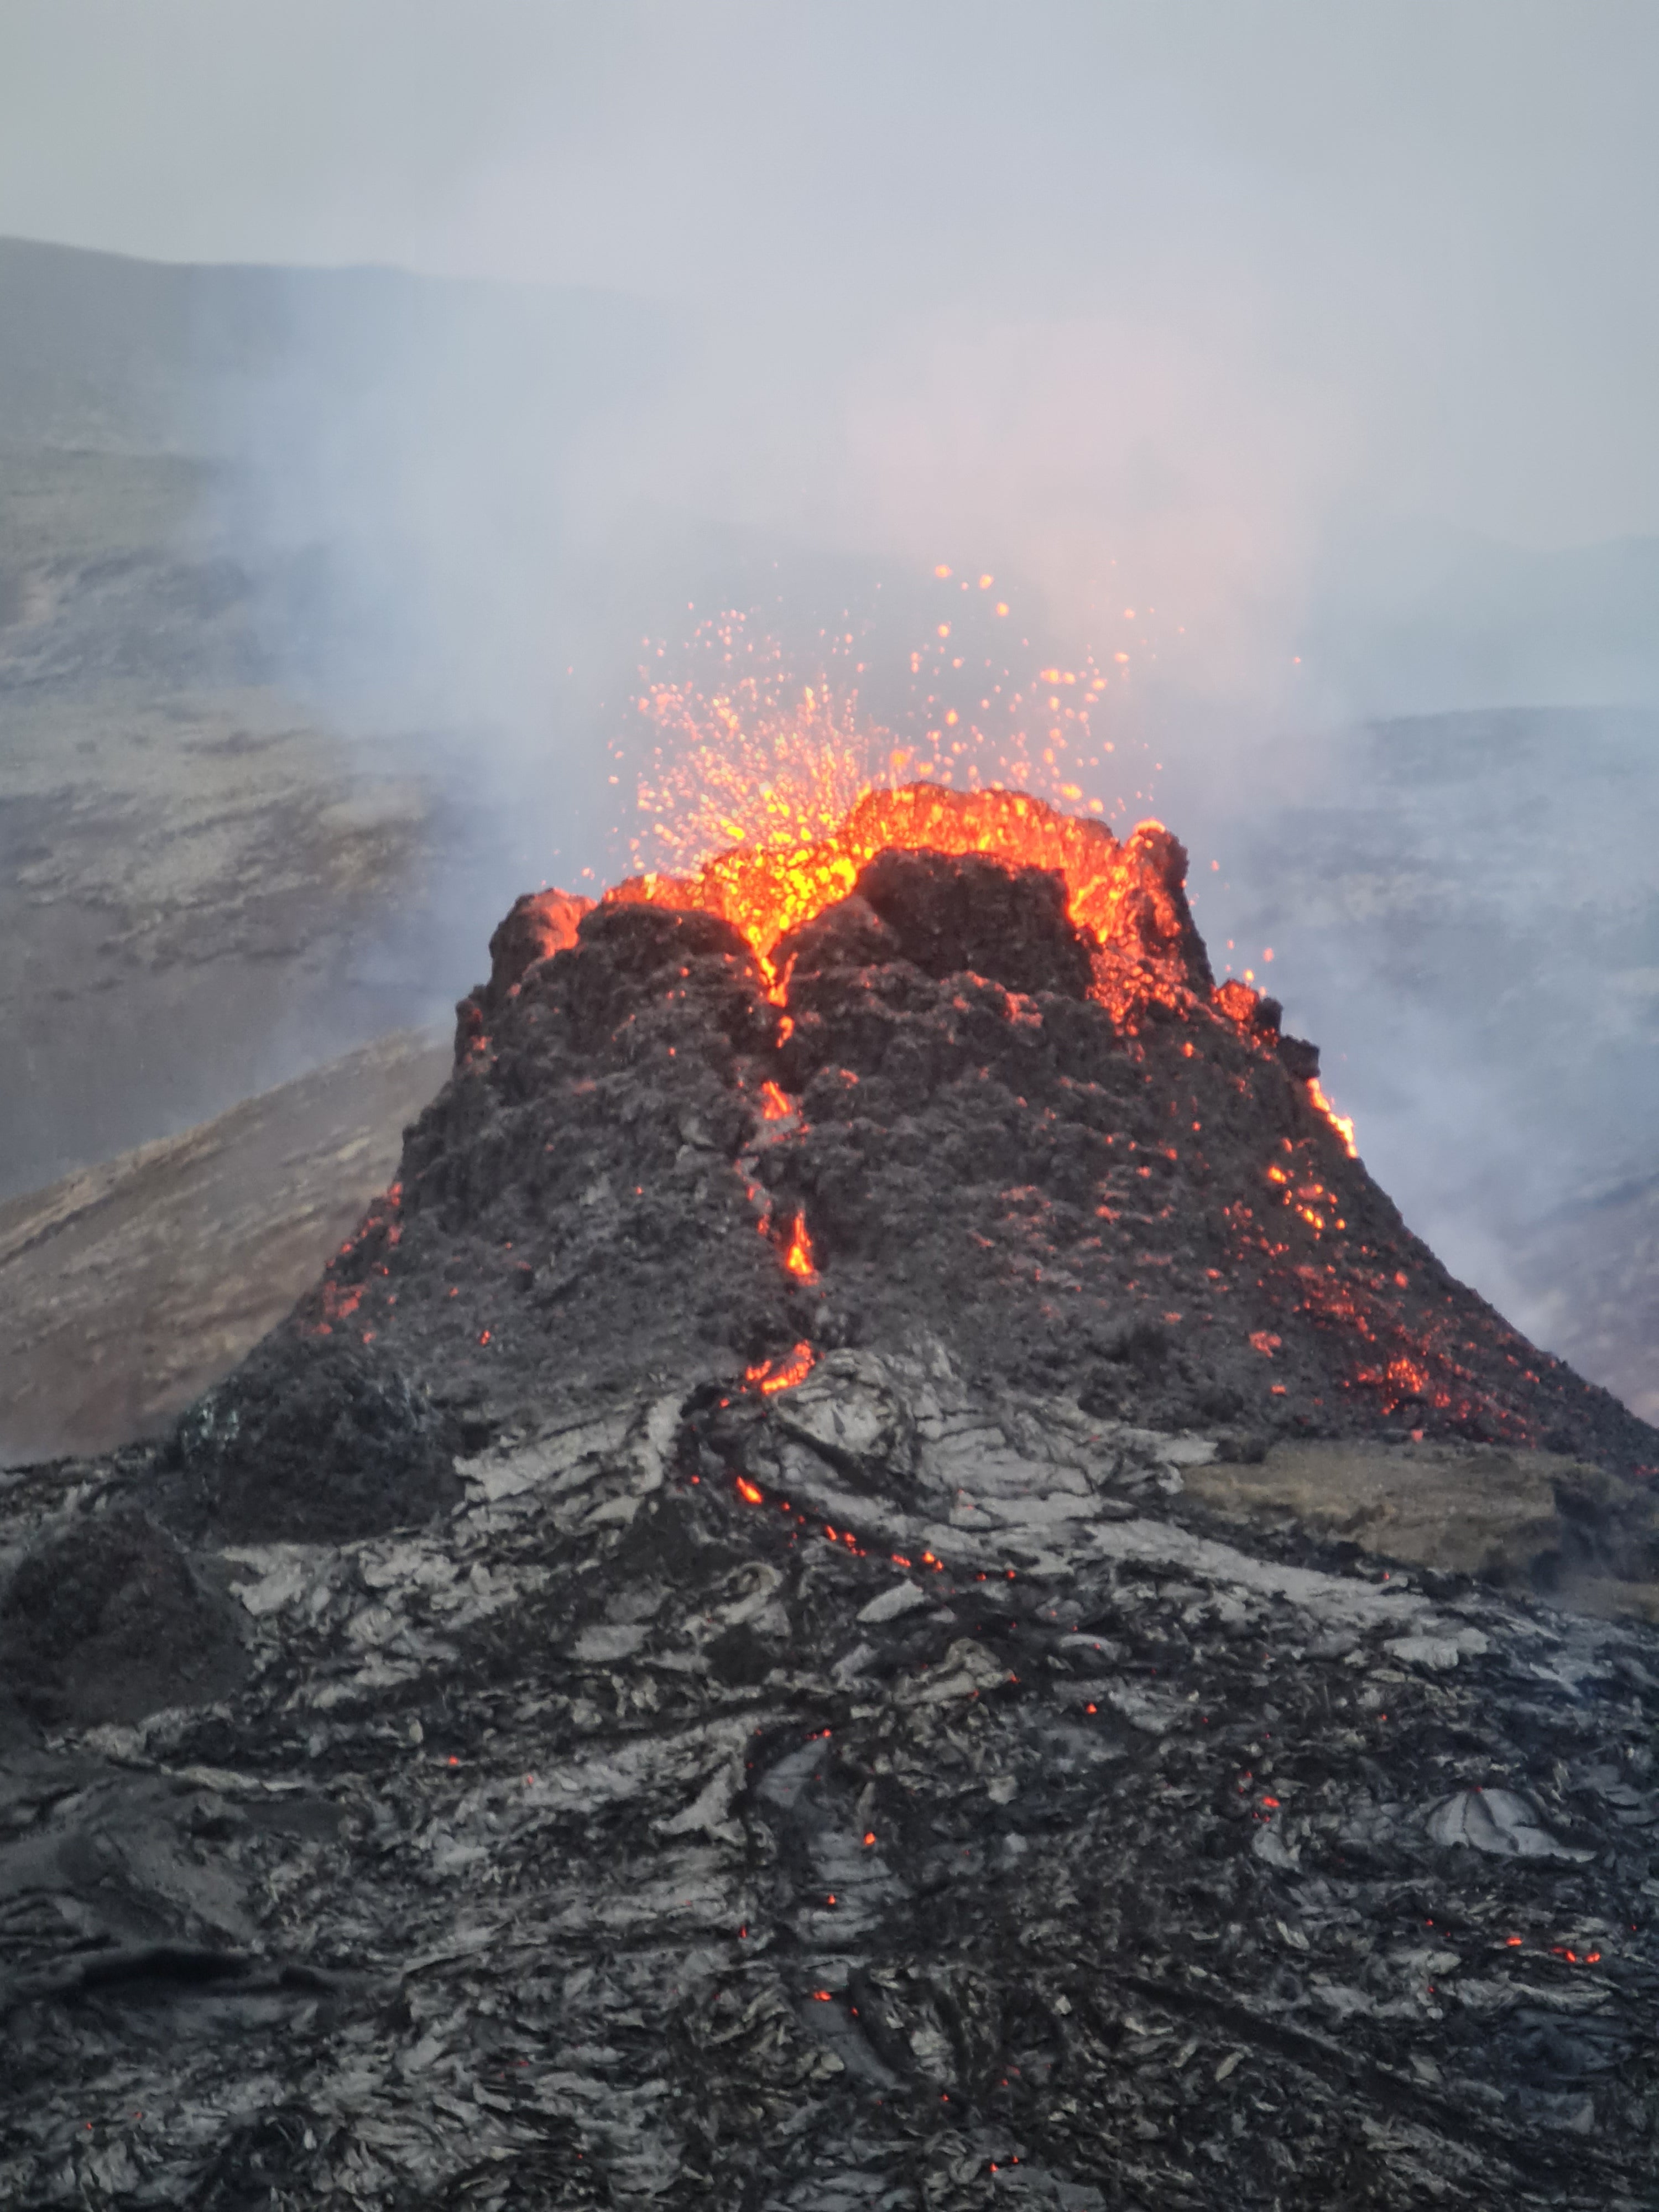 April 2021 - Newsletter | Volcanic eruption, Win a trip to Iceland and some other shameless plugs